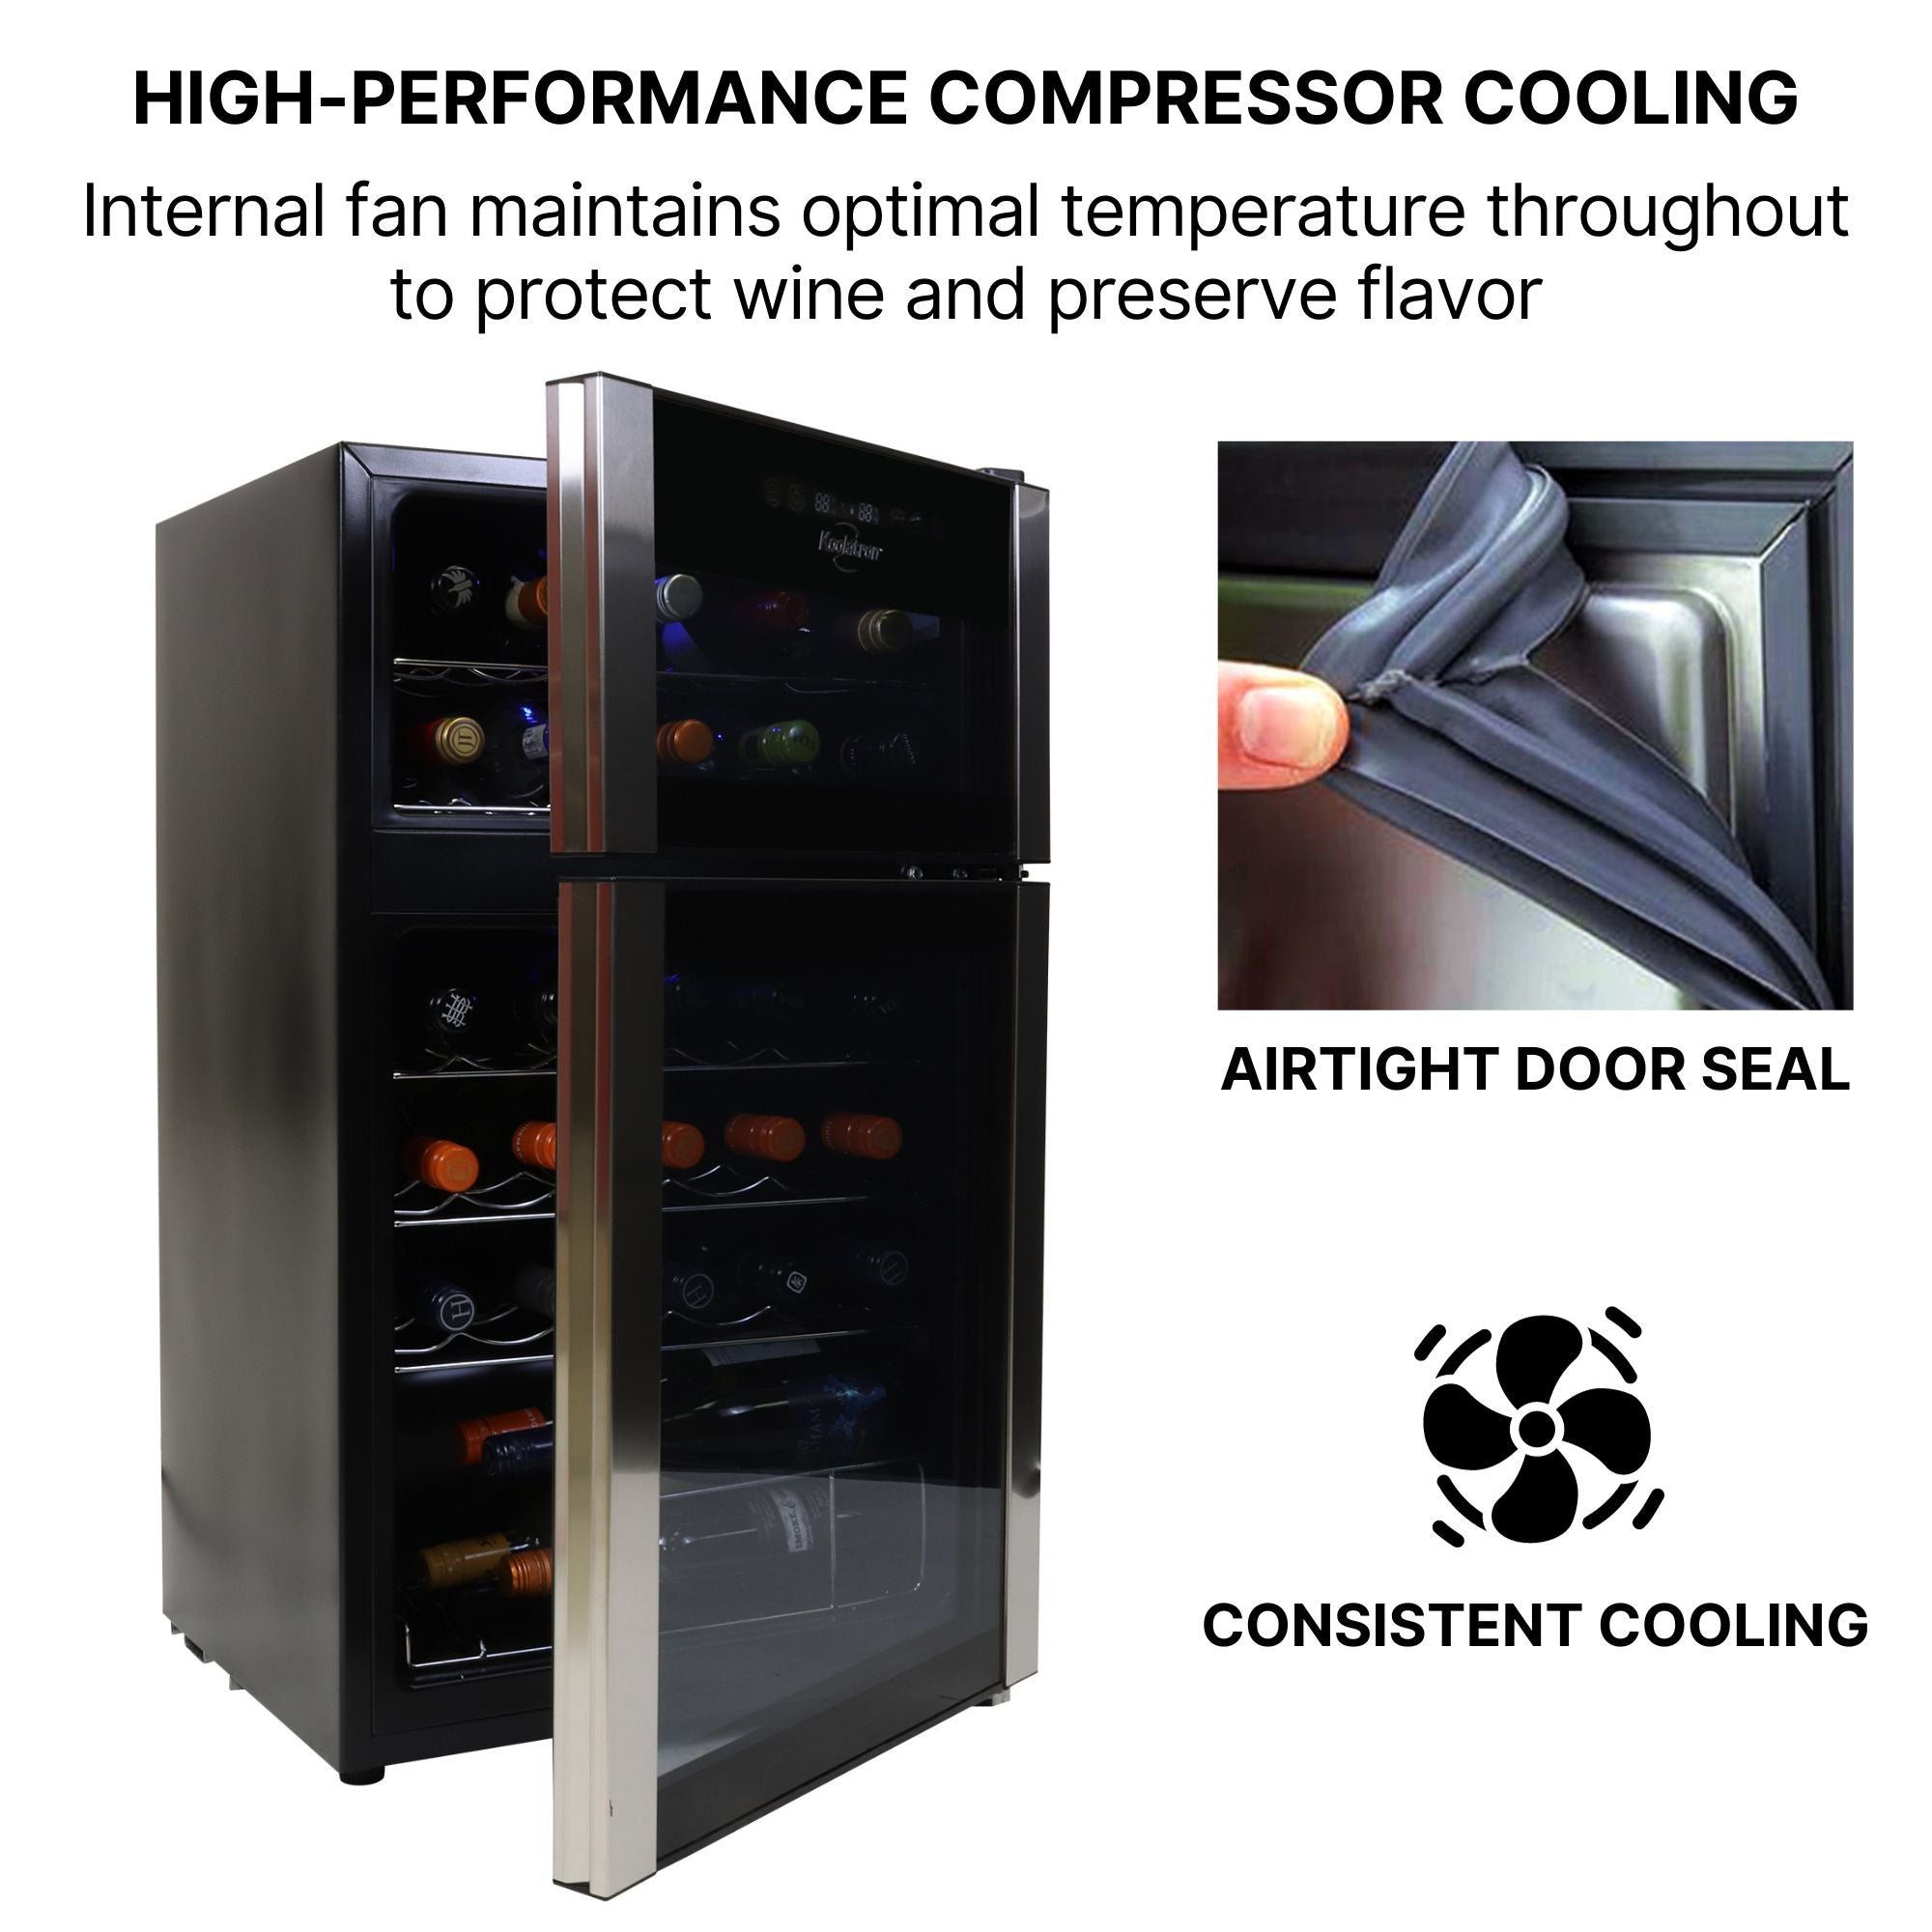 Koolatron 29 bottle dual zone freestanding wine fridge, partly open. To the right is an inset closeup of a person's finger bending the rubber door gasket, captioned, "Airtight door seal," and a fan icon captioned, "consistent cooling." Text above reads, "High-performance compressor cooling: Internal fan maintains optimal temperature throughout both chambers to protect wine and preserve flavor"